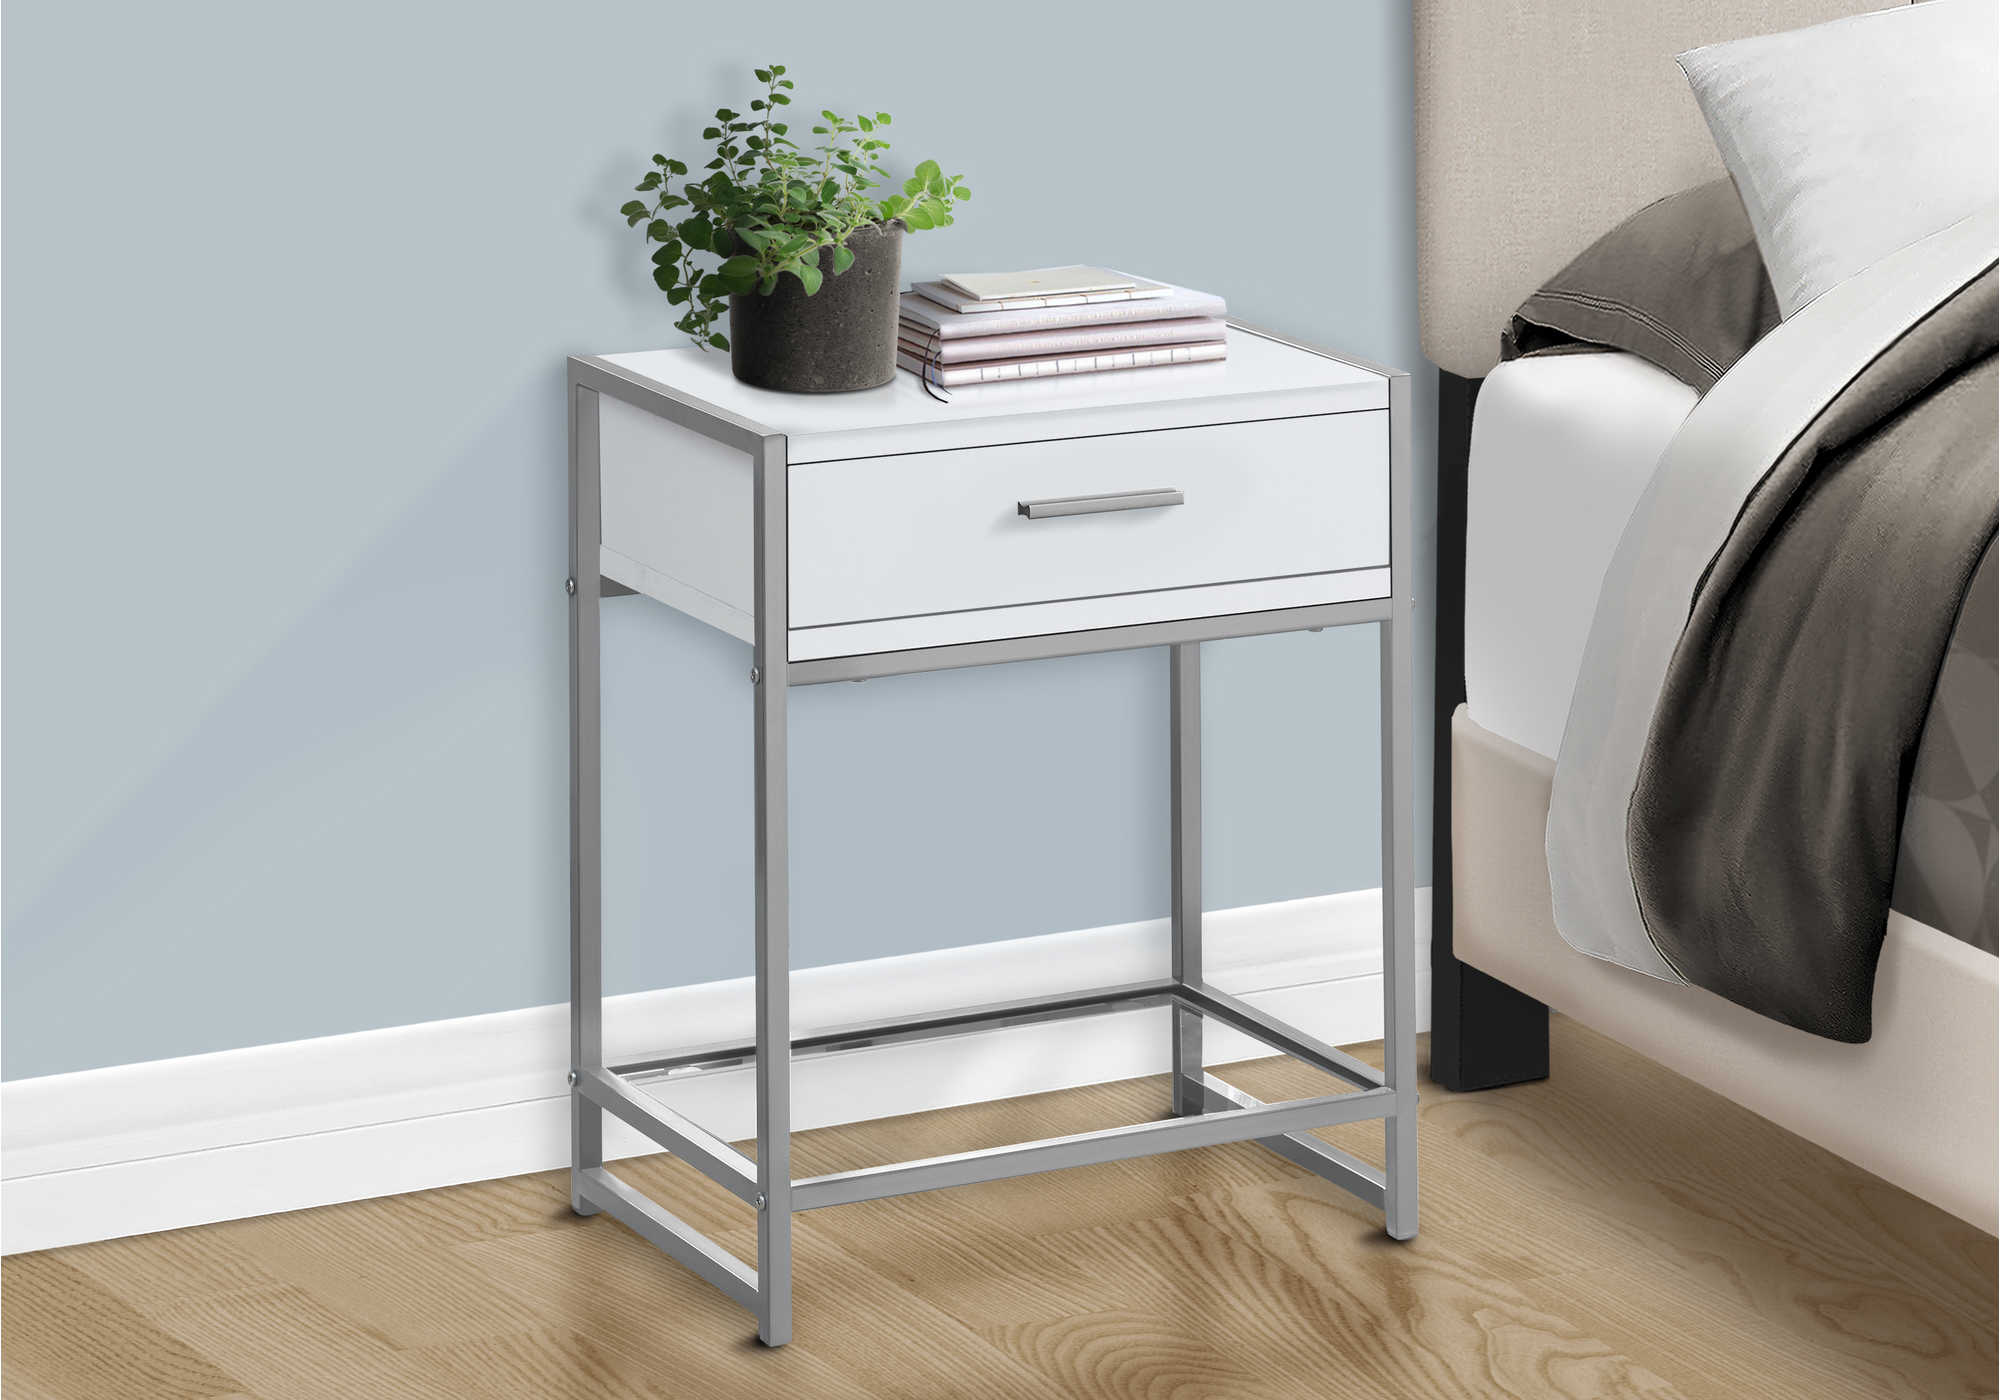 NIGHTSTAND - 22"H / WHITE/ SILVER METAL/ TEMPERED GLASS